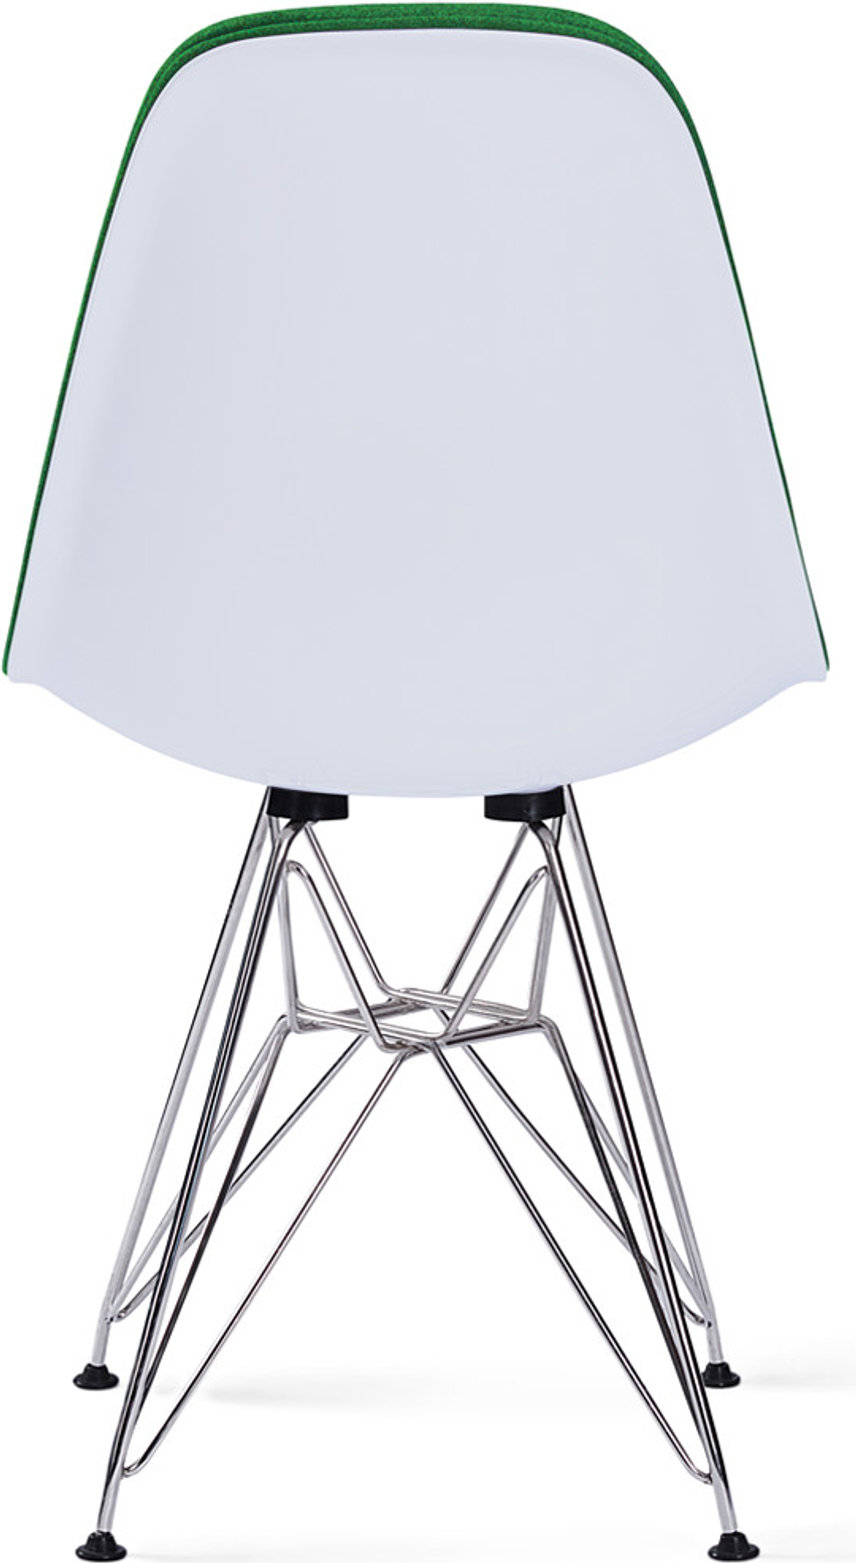 DSR Style Upholstered Dining Chair Green image.